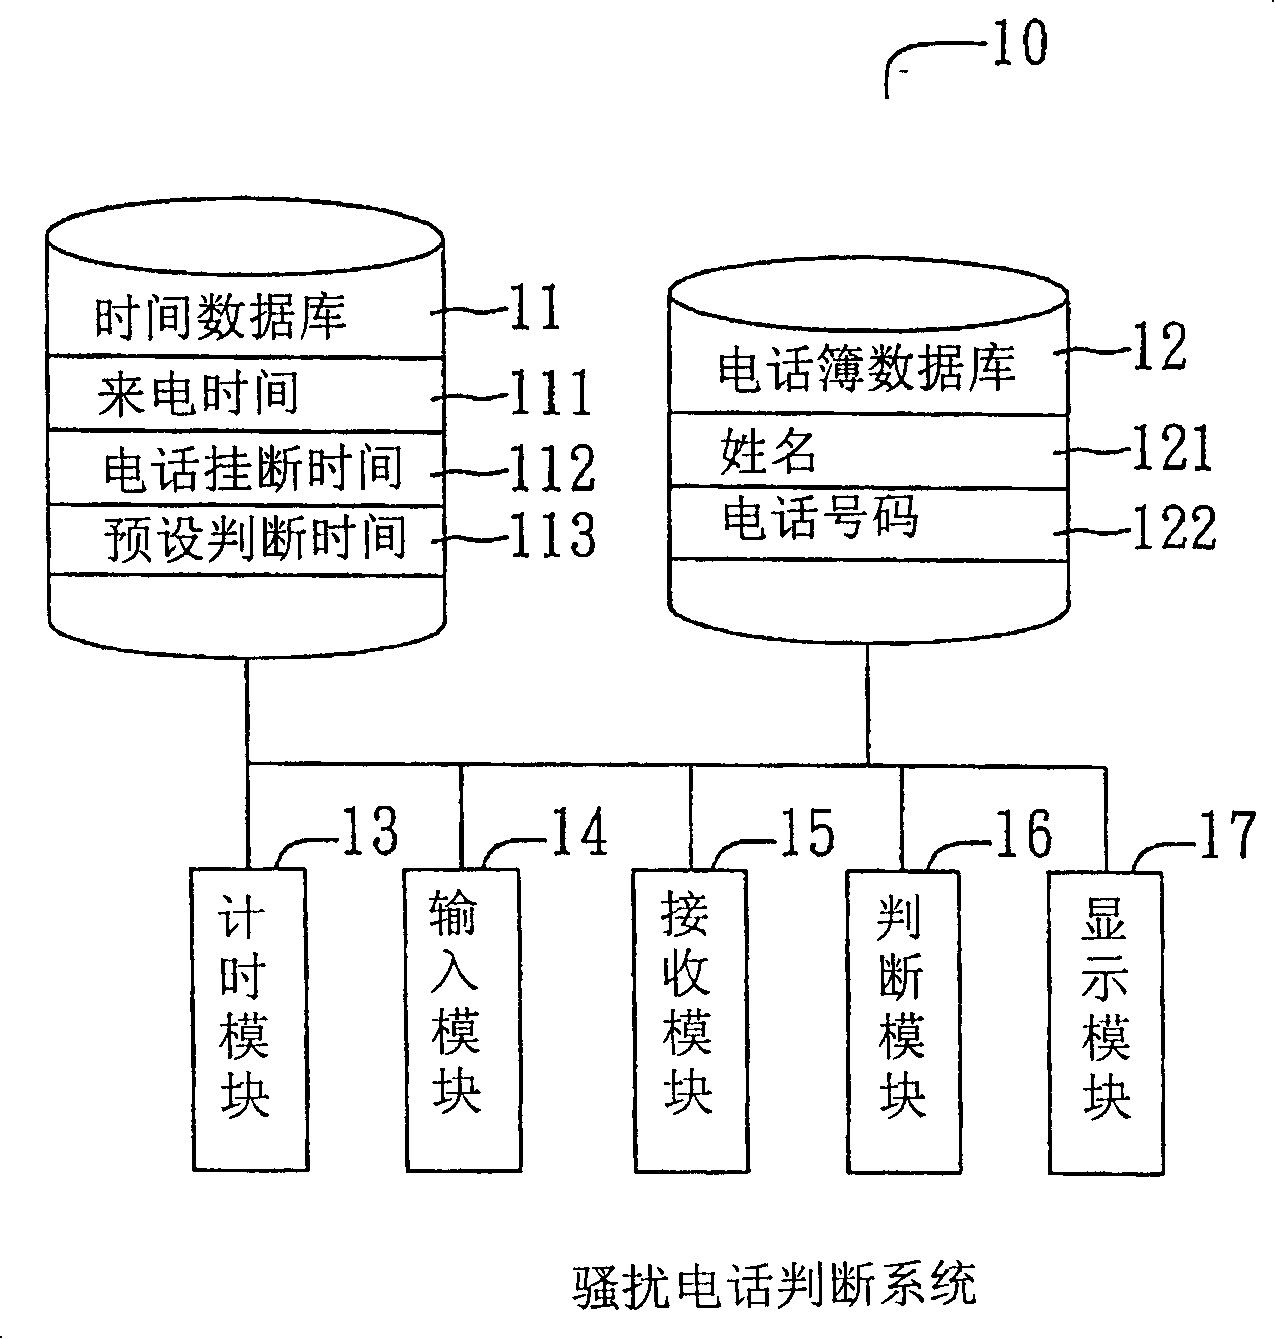 Method and system for judgment of annoy telephone